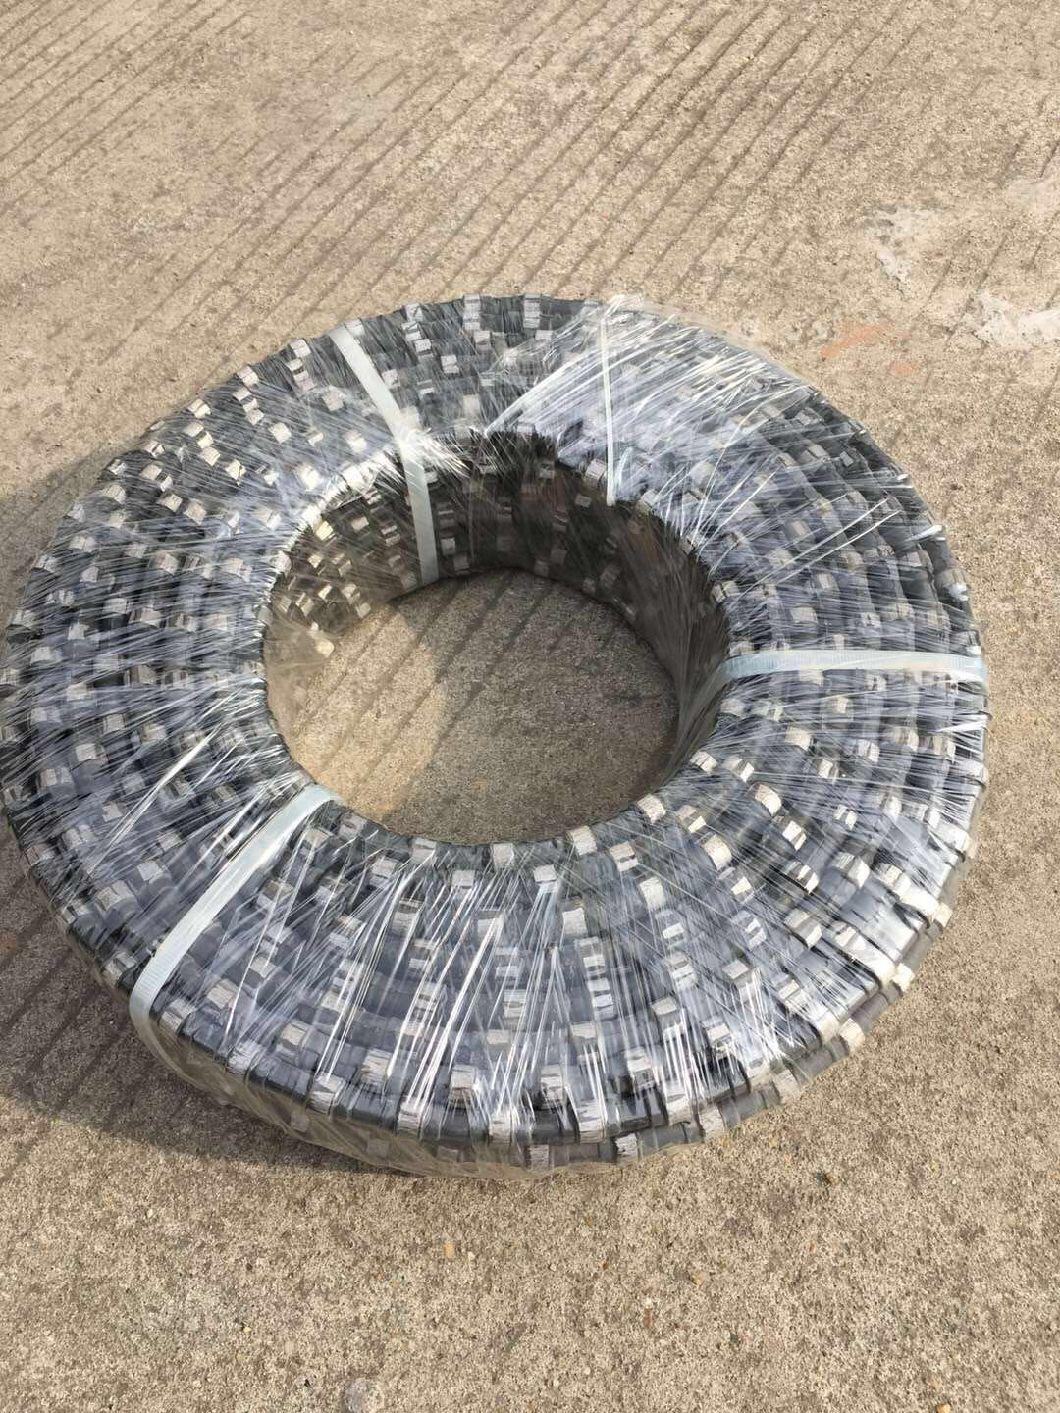 Hot Sell Diamond Wire Saw for Granite Marble Diamond Tools Cutting